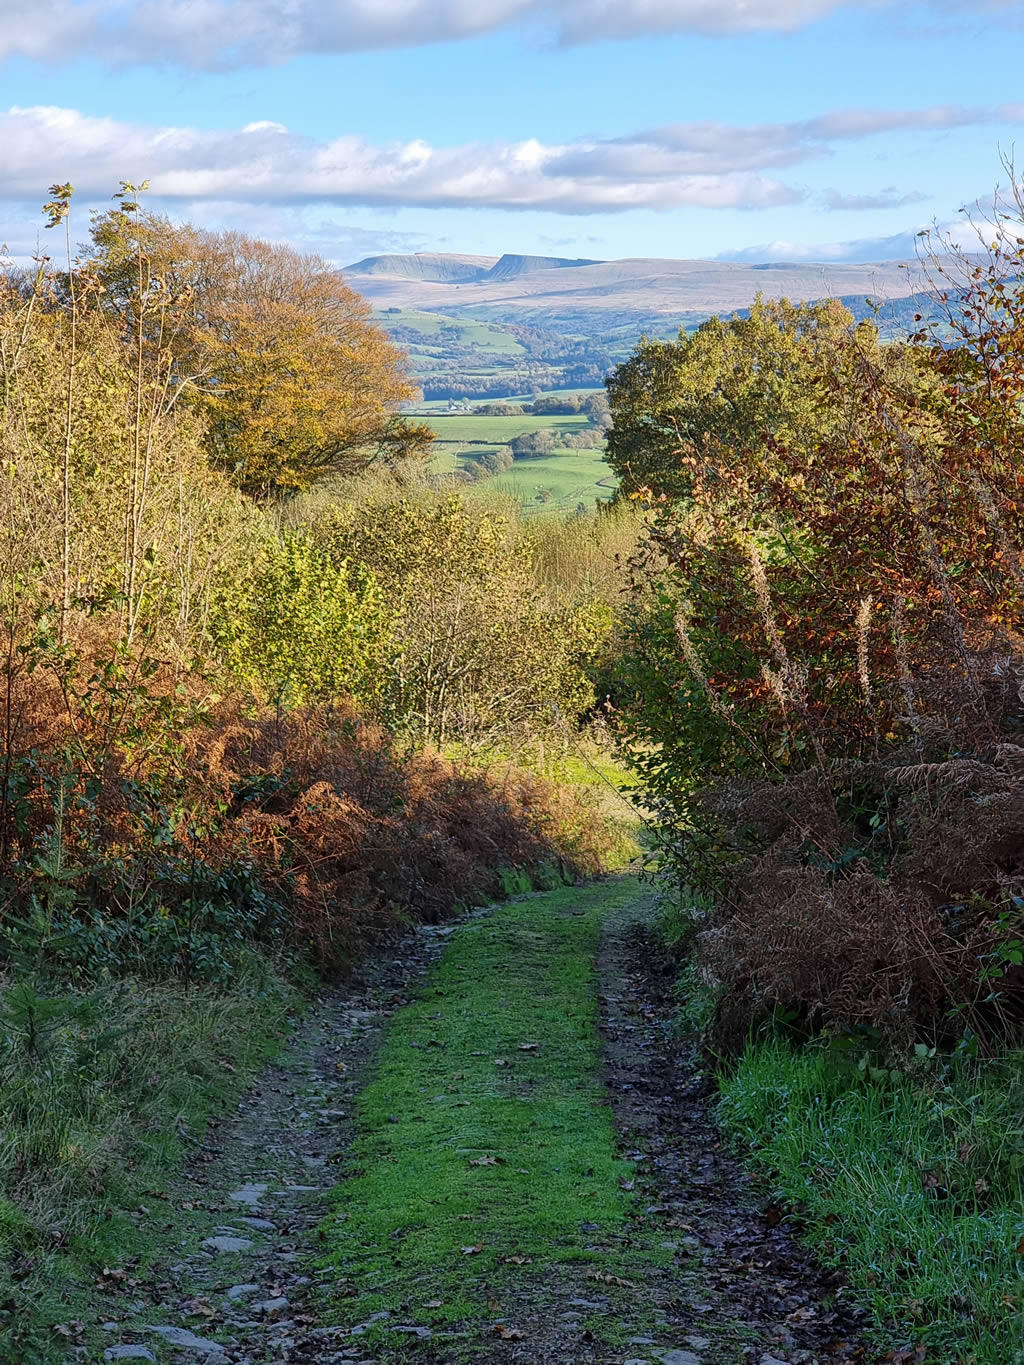 Muddy lane with view over Carmarthen Fans